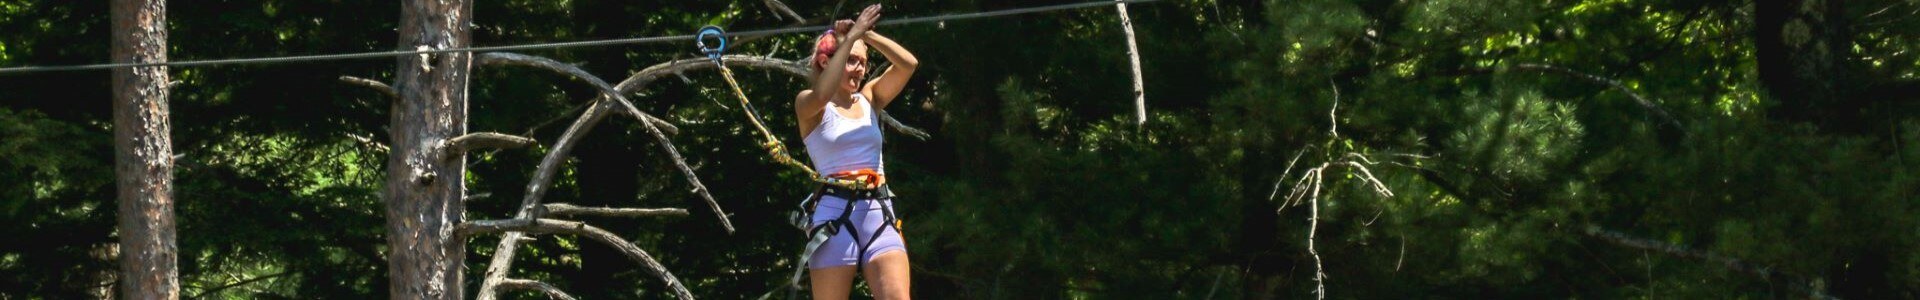 a single girl in the treetop course